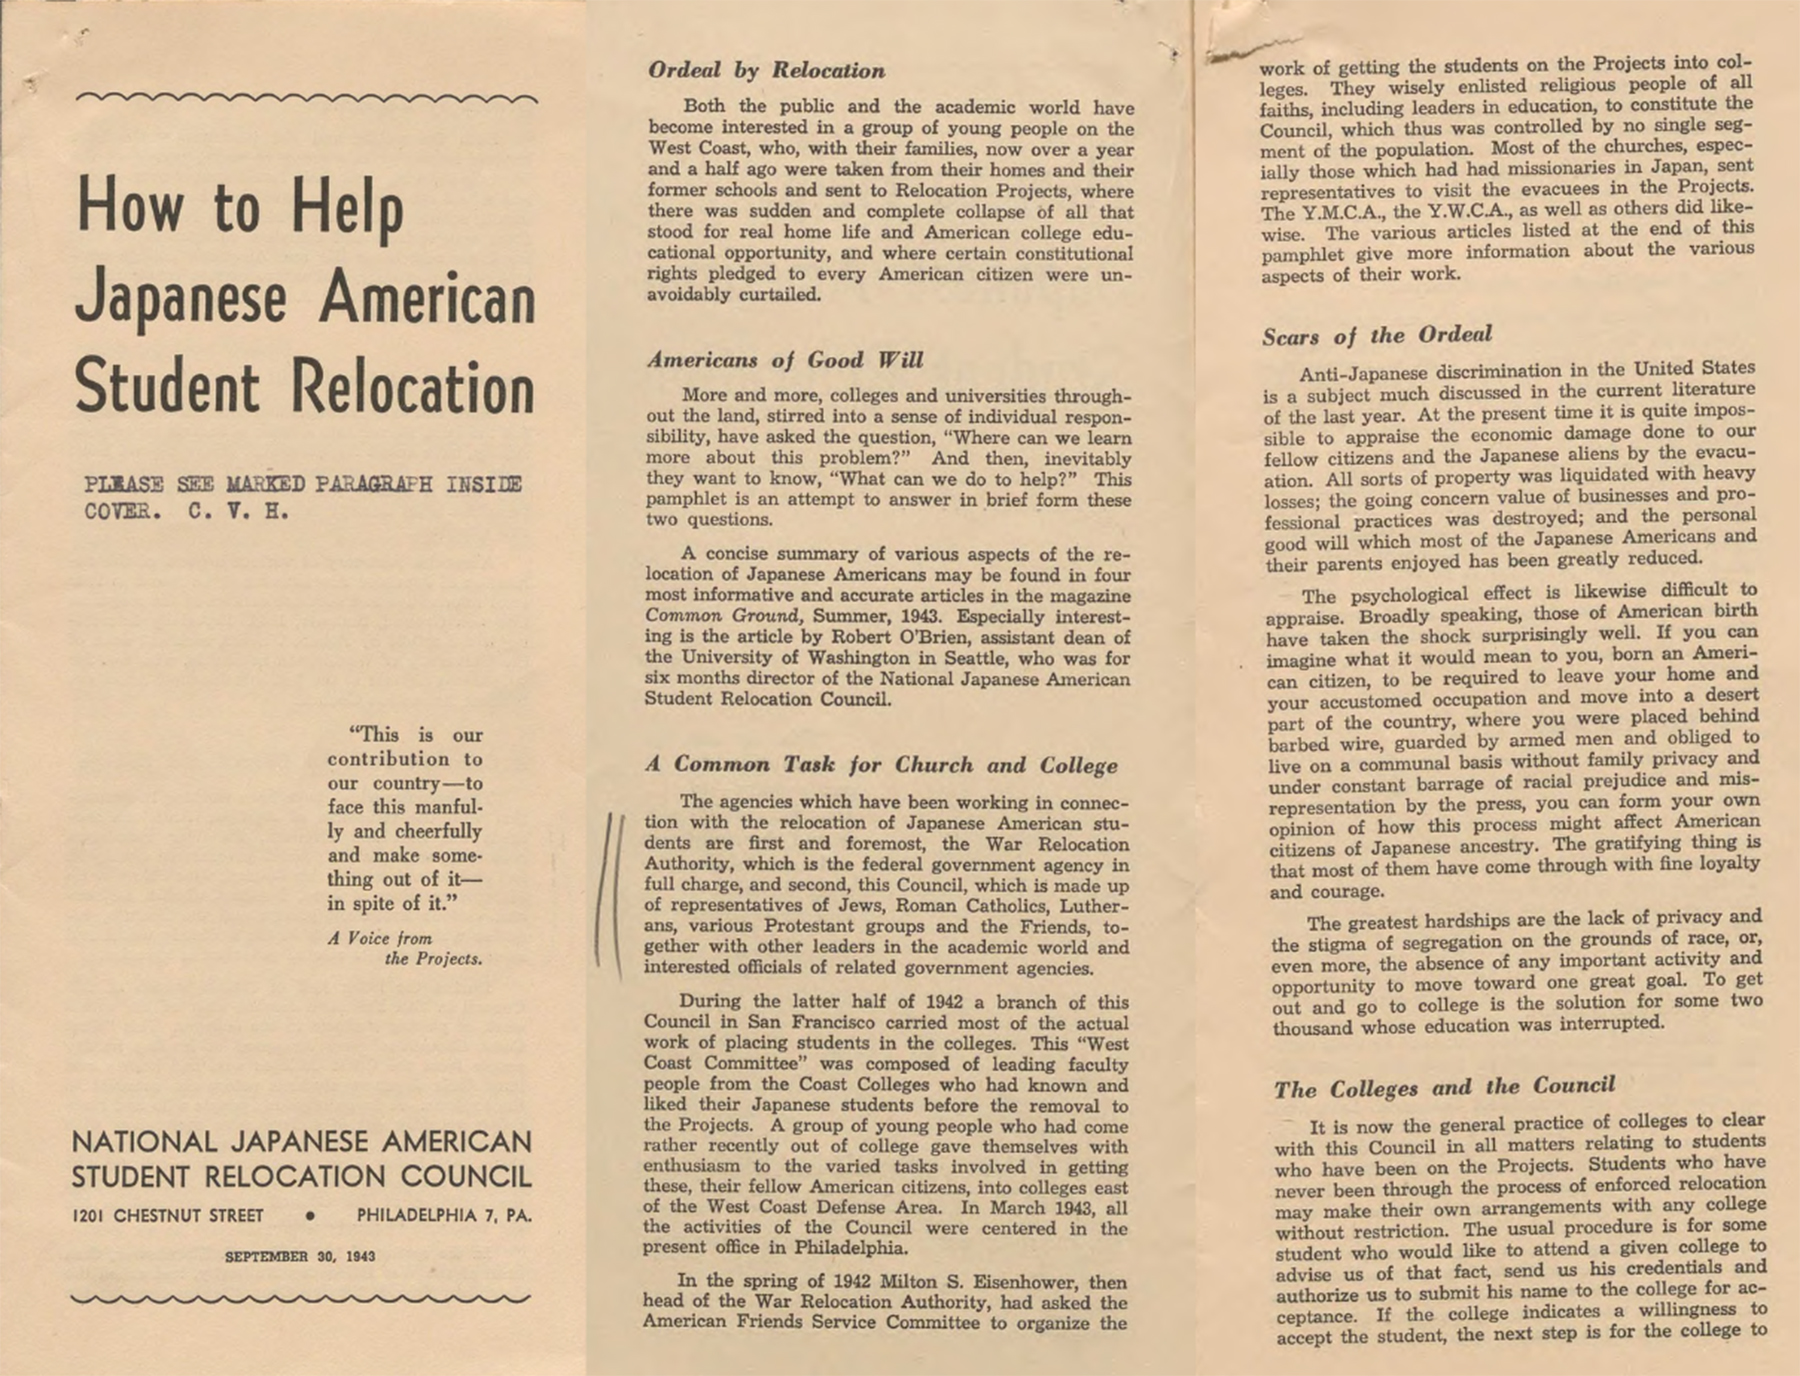 Informational pamphlet published by the National Japanese American Student Relocation Council, September 30, 1943. Pearl: 343578